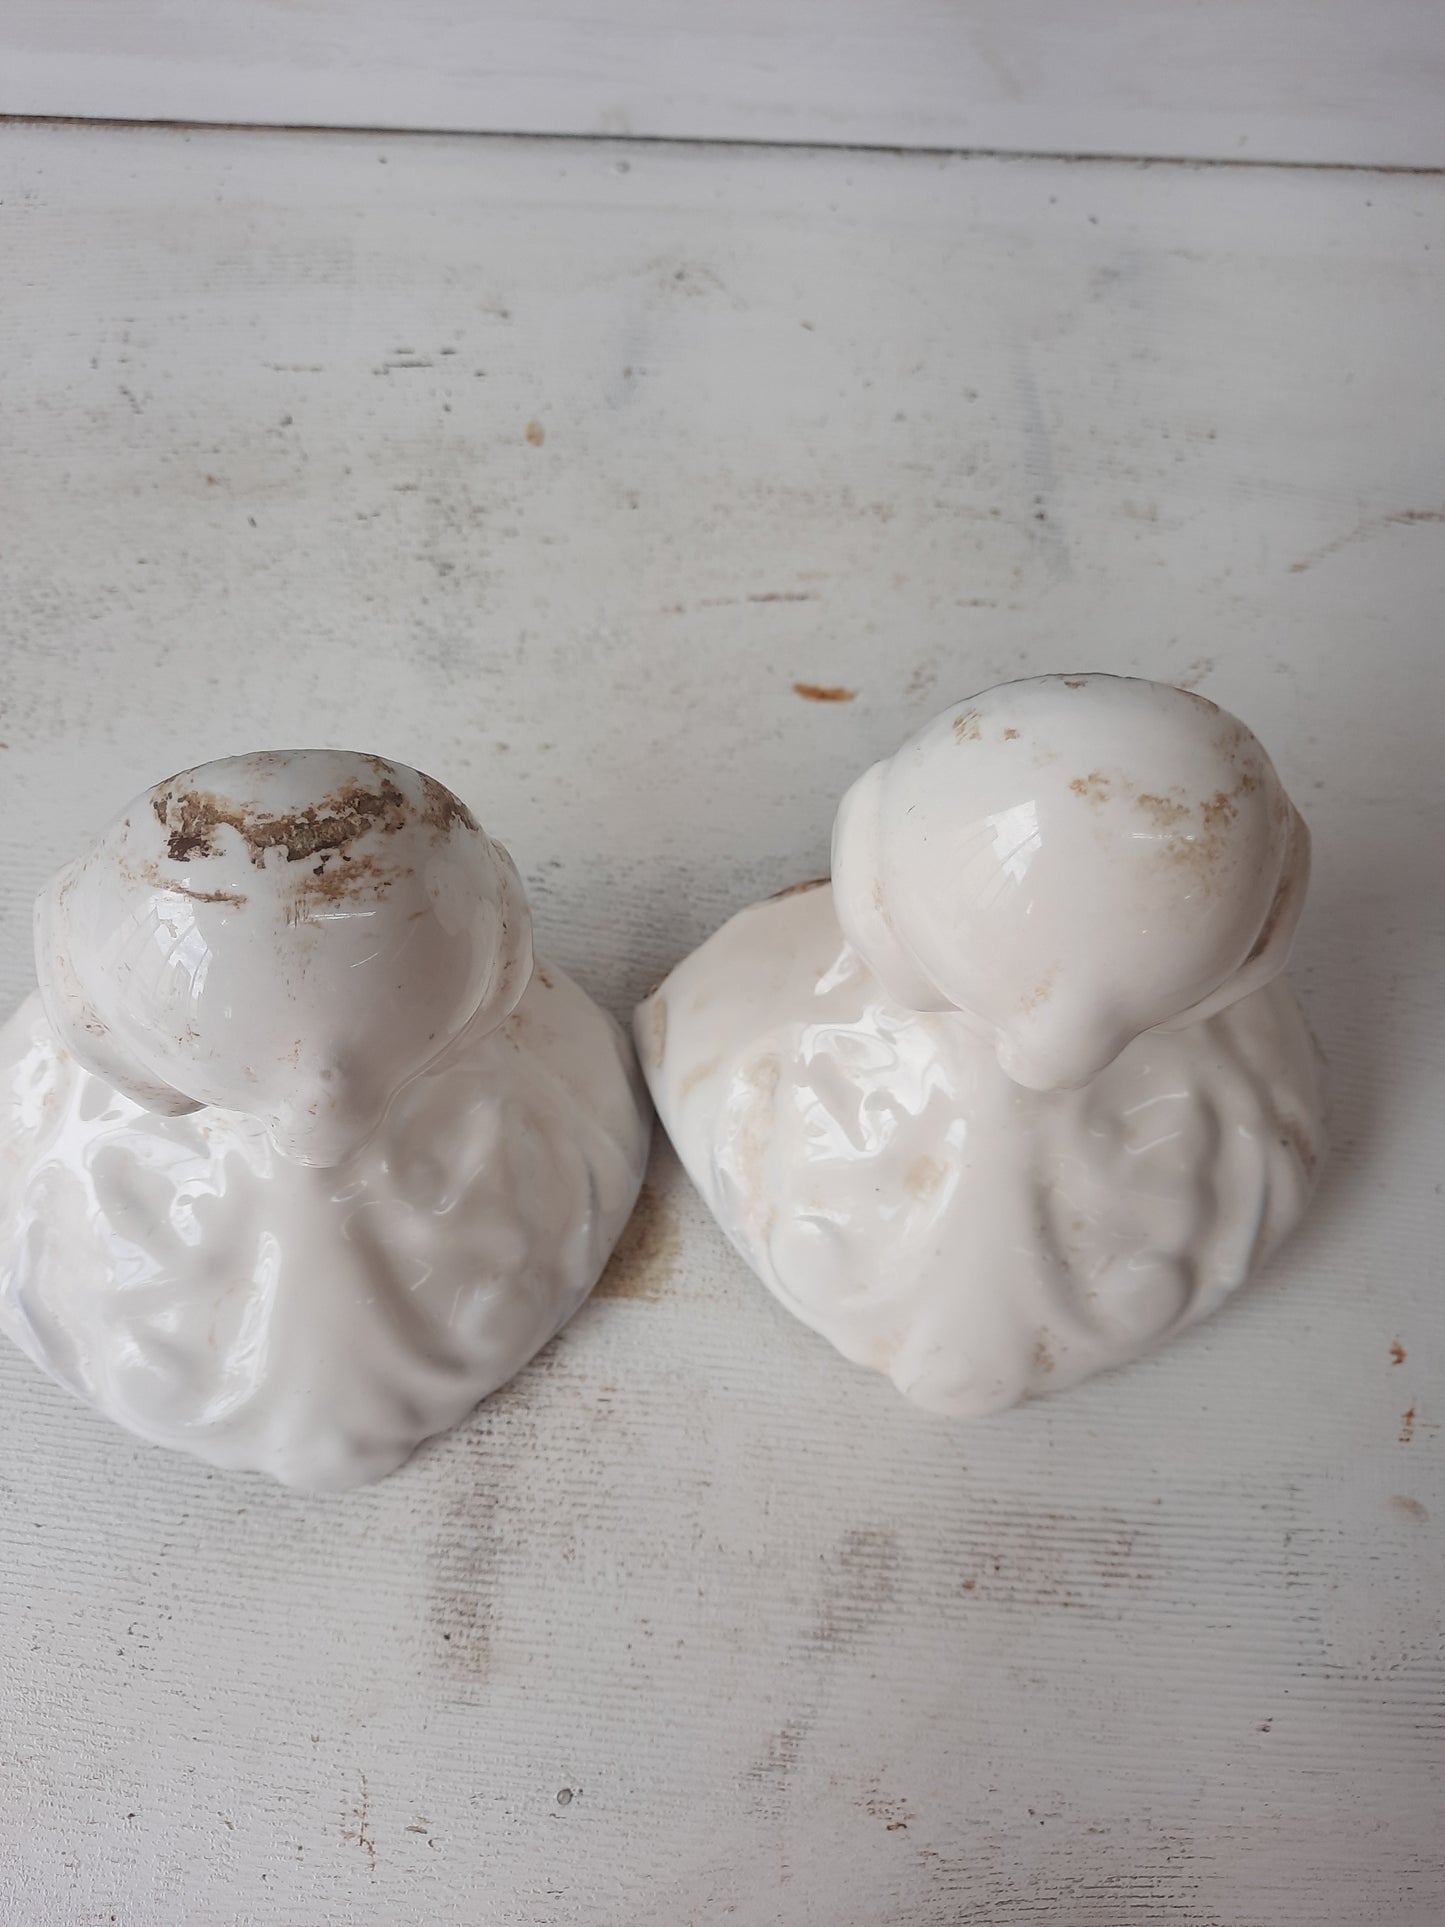 Antique Pair of Cast Iron and Porcelain Ball and Claw Design Bathtub Feet #070102